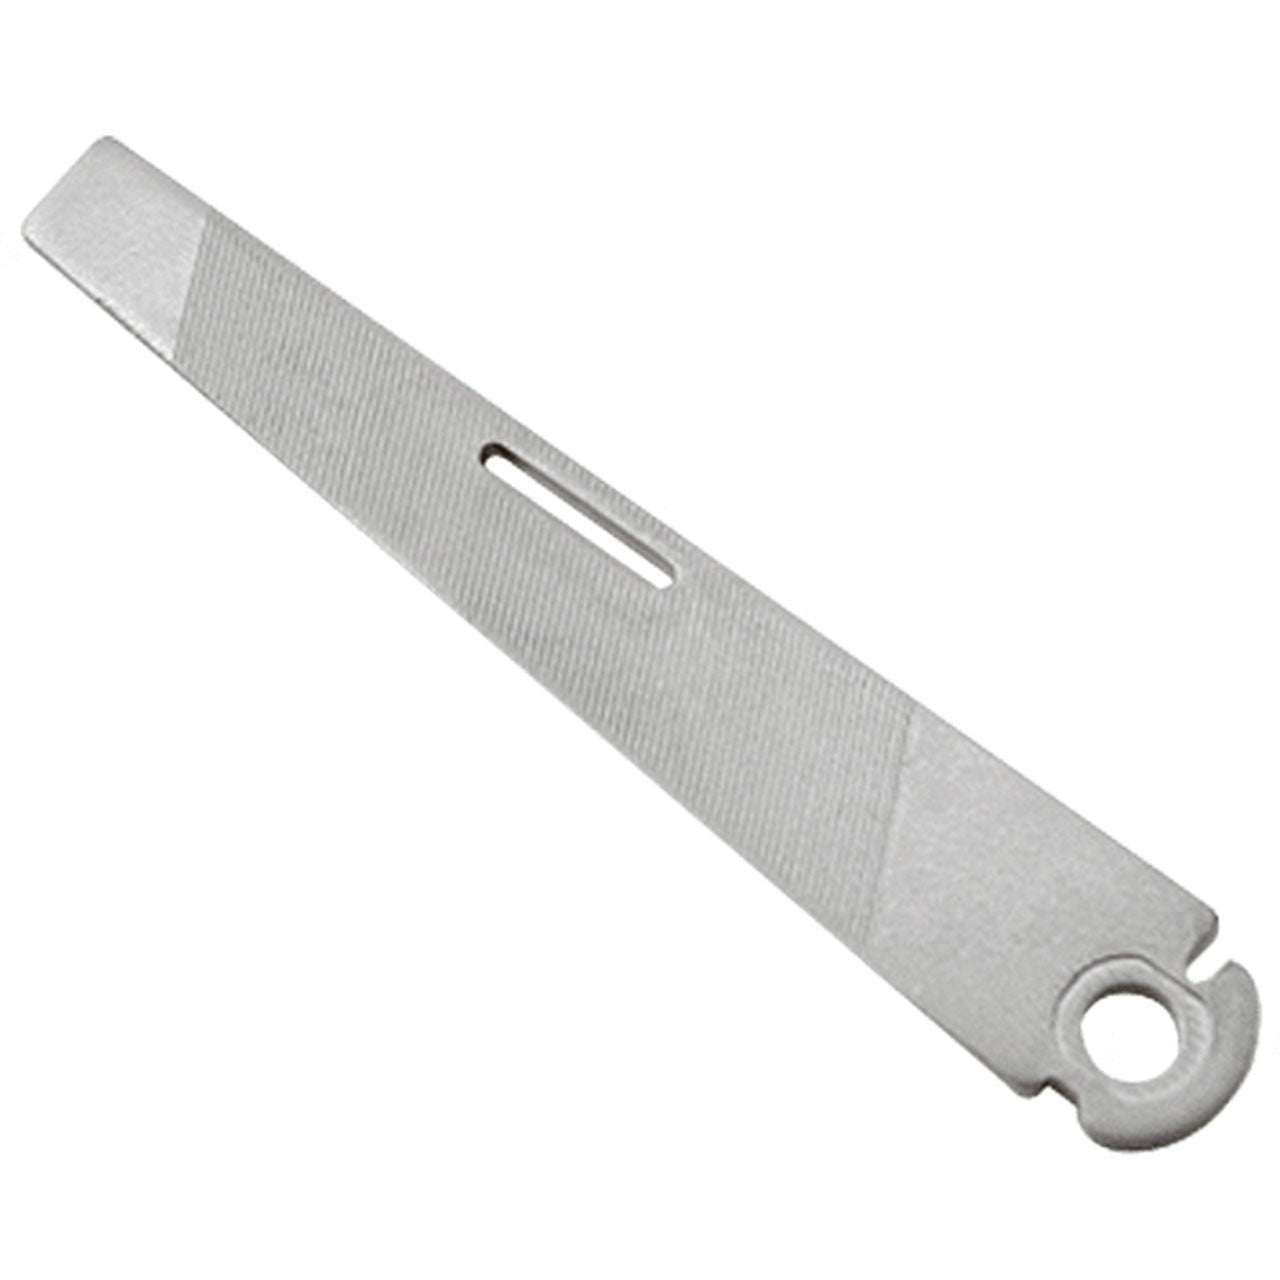 3-Sided File with Screwdriver Tip